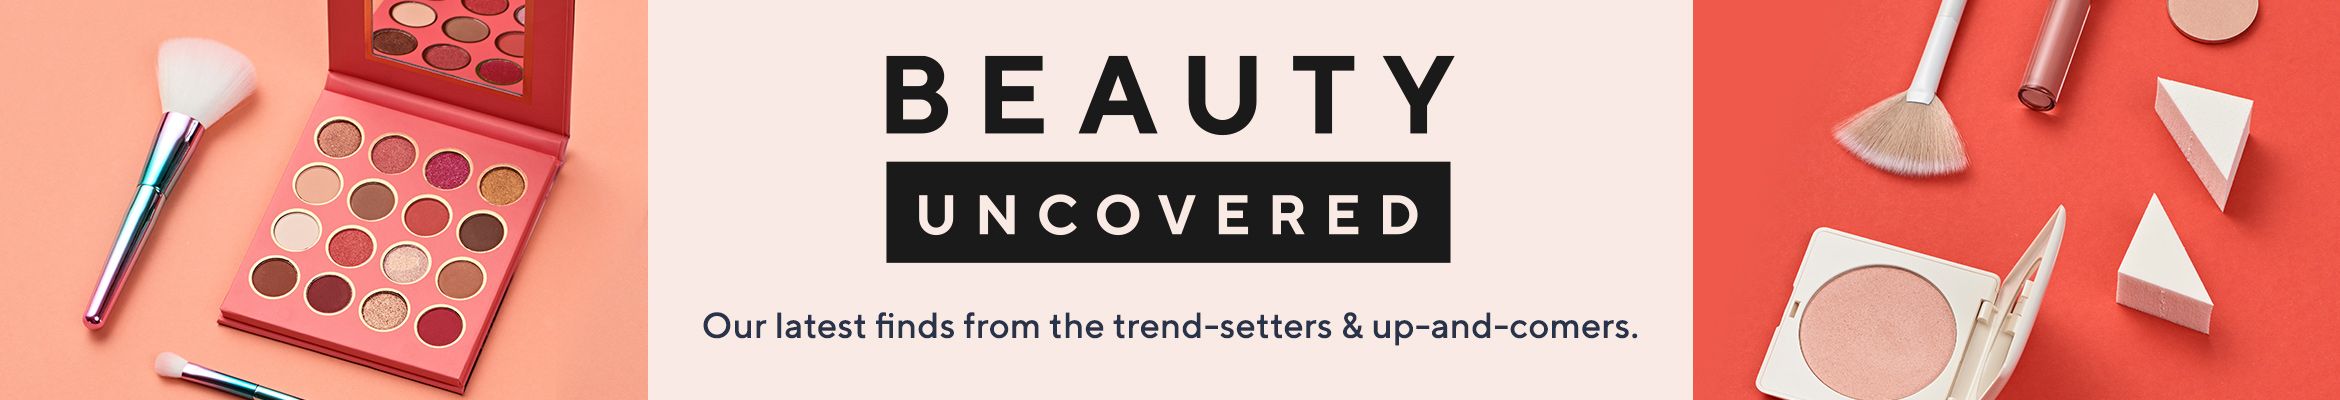 Beauty Uncovered - Our latest finds from the trend-setters & up-and-comers.